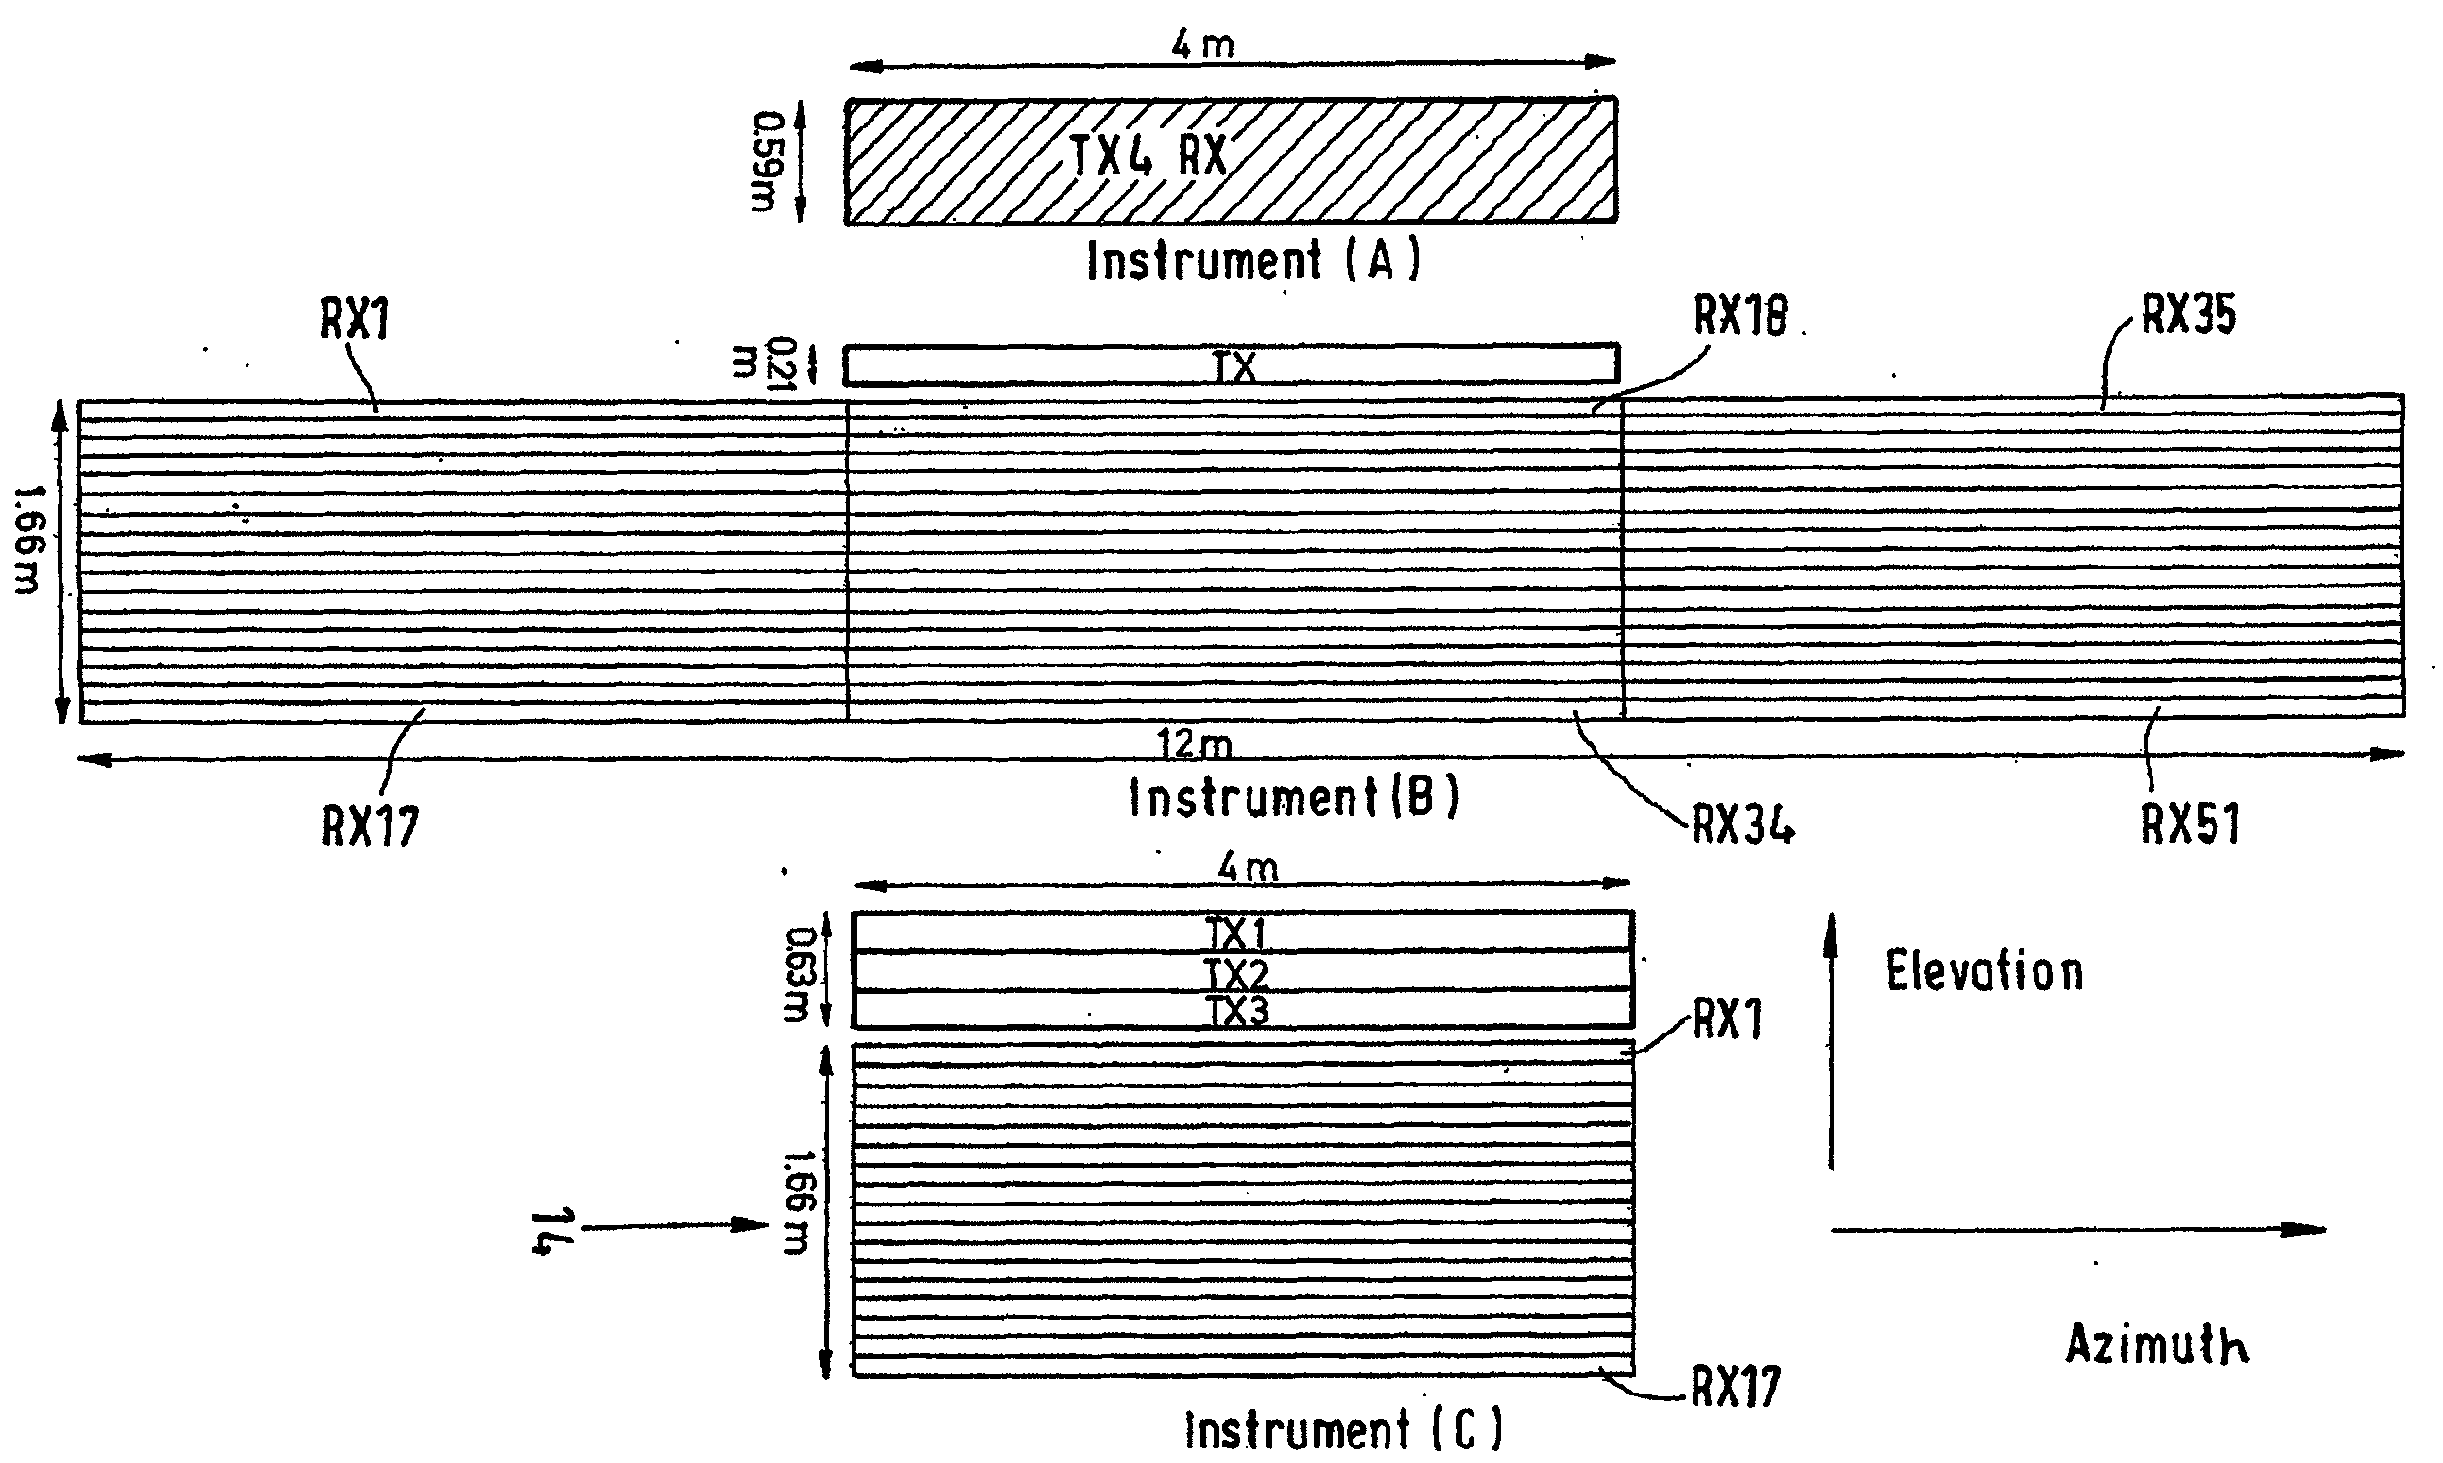 High-resolution synthetic aperture radar device and antenna for one such radar